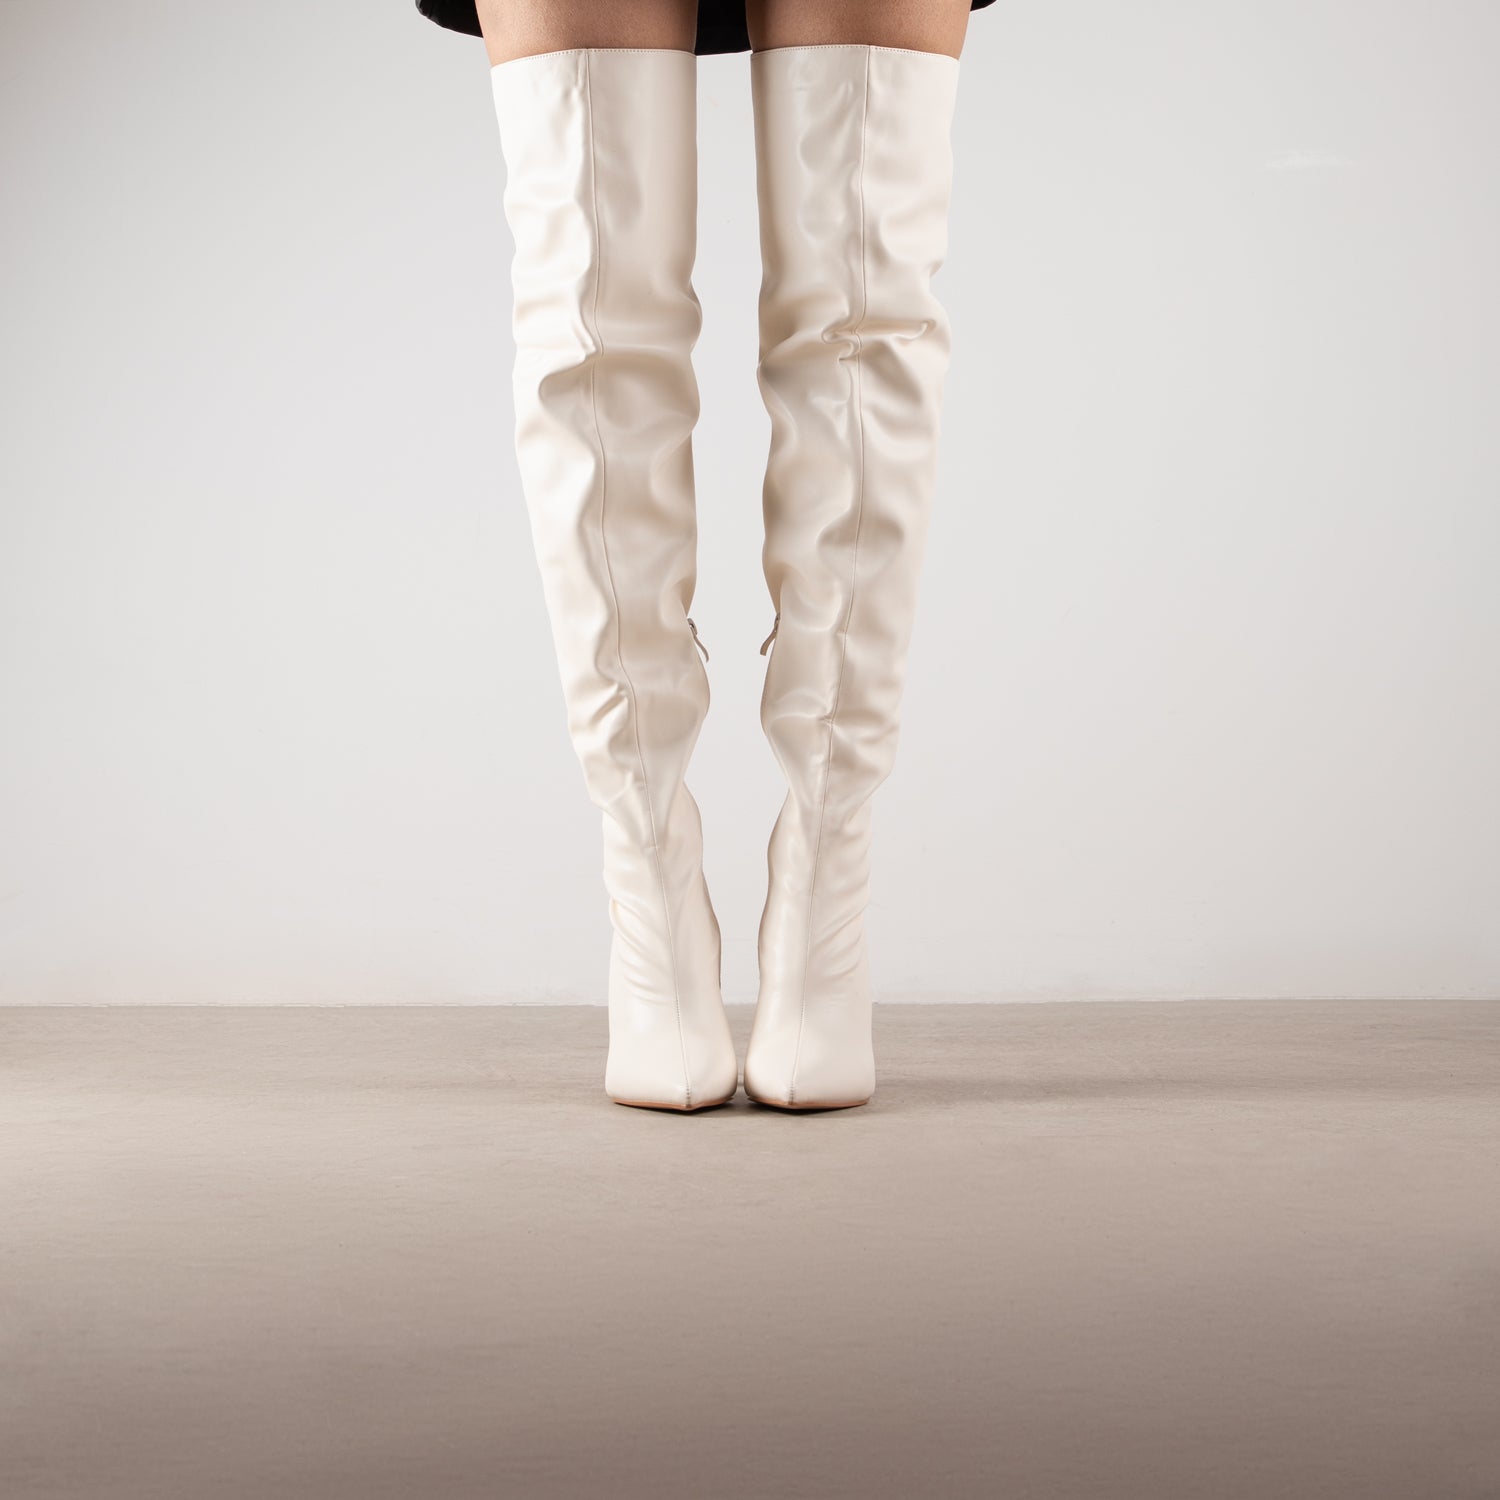 RAID Domino Over The Knee Boot in White